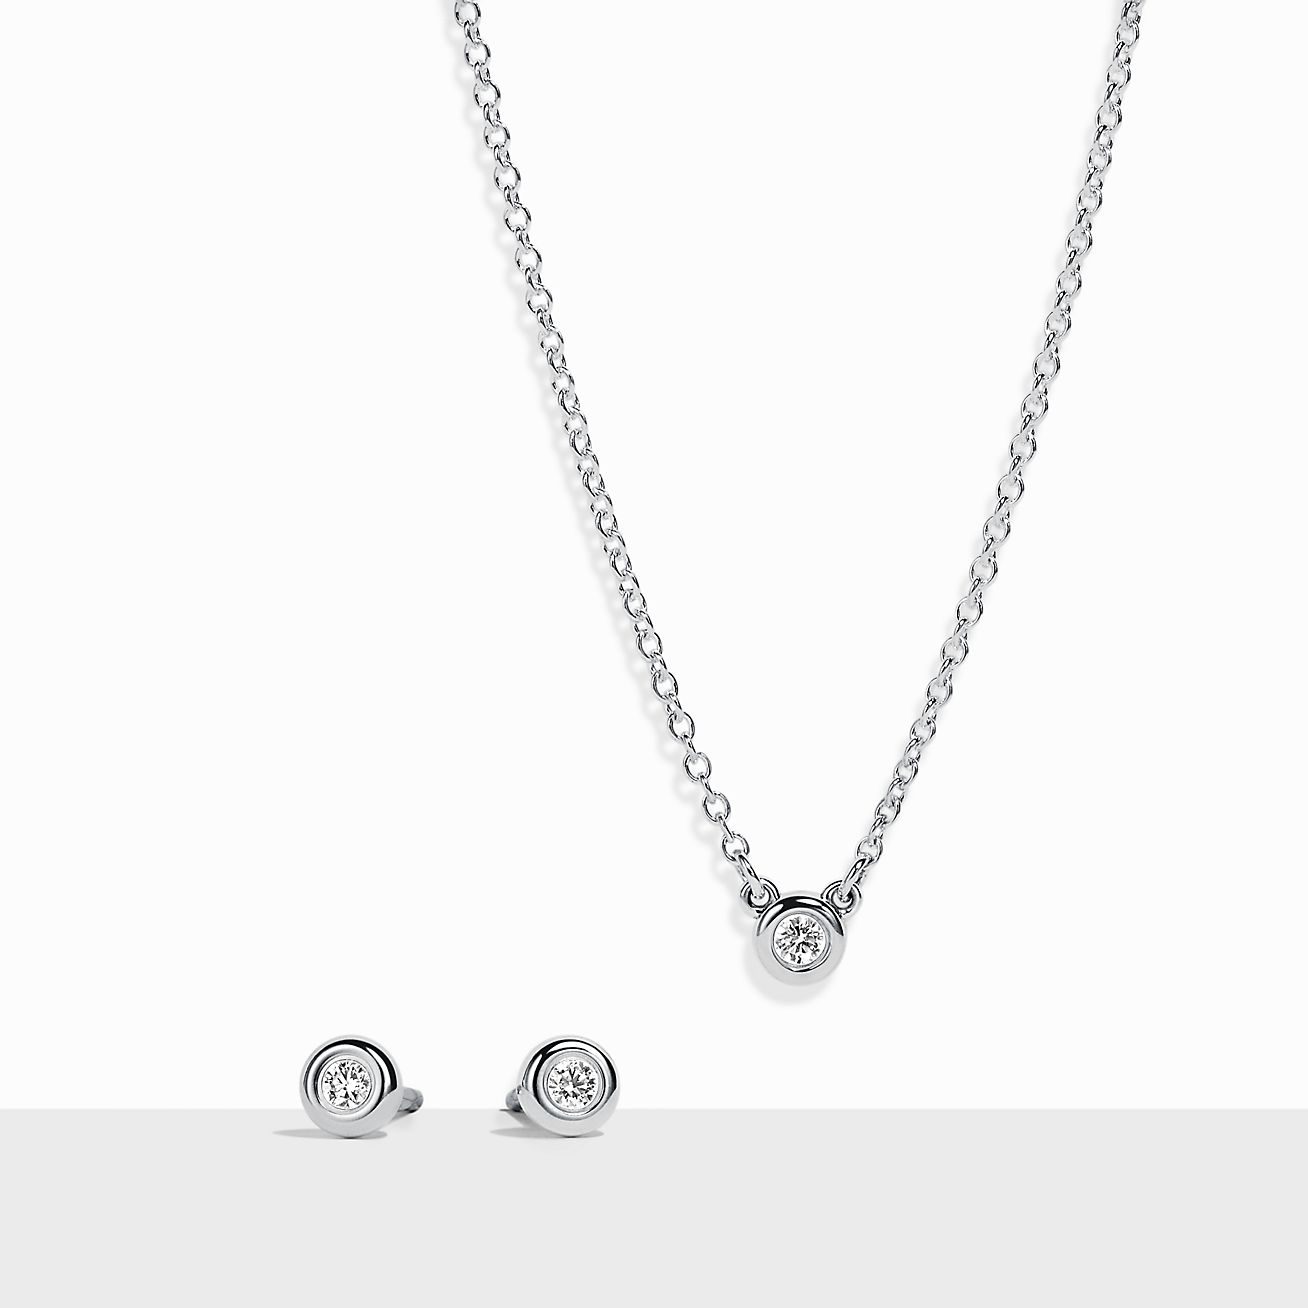 Amazon.com: Pandora Round Sparkle Halo Necklace and Earrings Gift Set -  Women's Sterling Silver Stud Earrings & Pendant Necklace, 45cm - Jewellery  Set With Gift Box: Clothing, Shoes & Jewelry